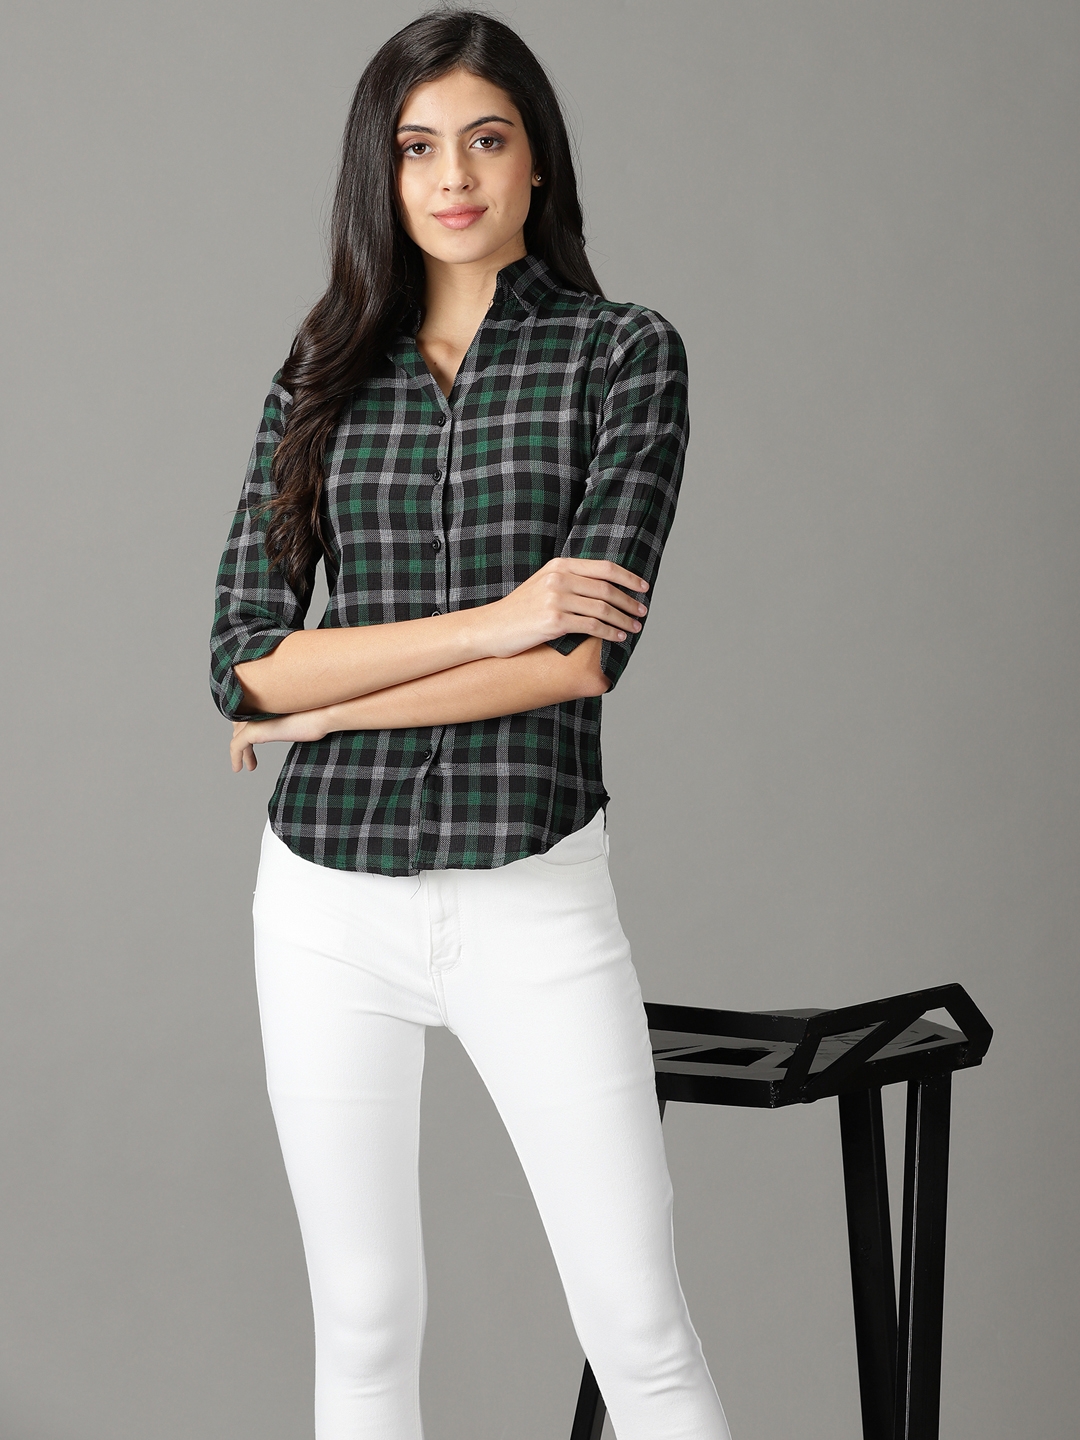 SHOWOFF Women's Spread Collar Green Checked Shirt